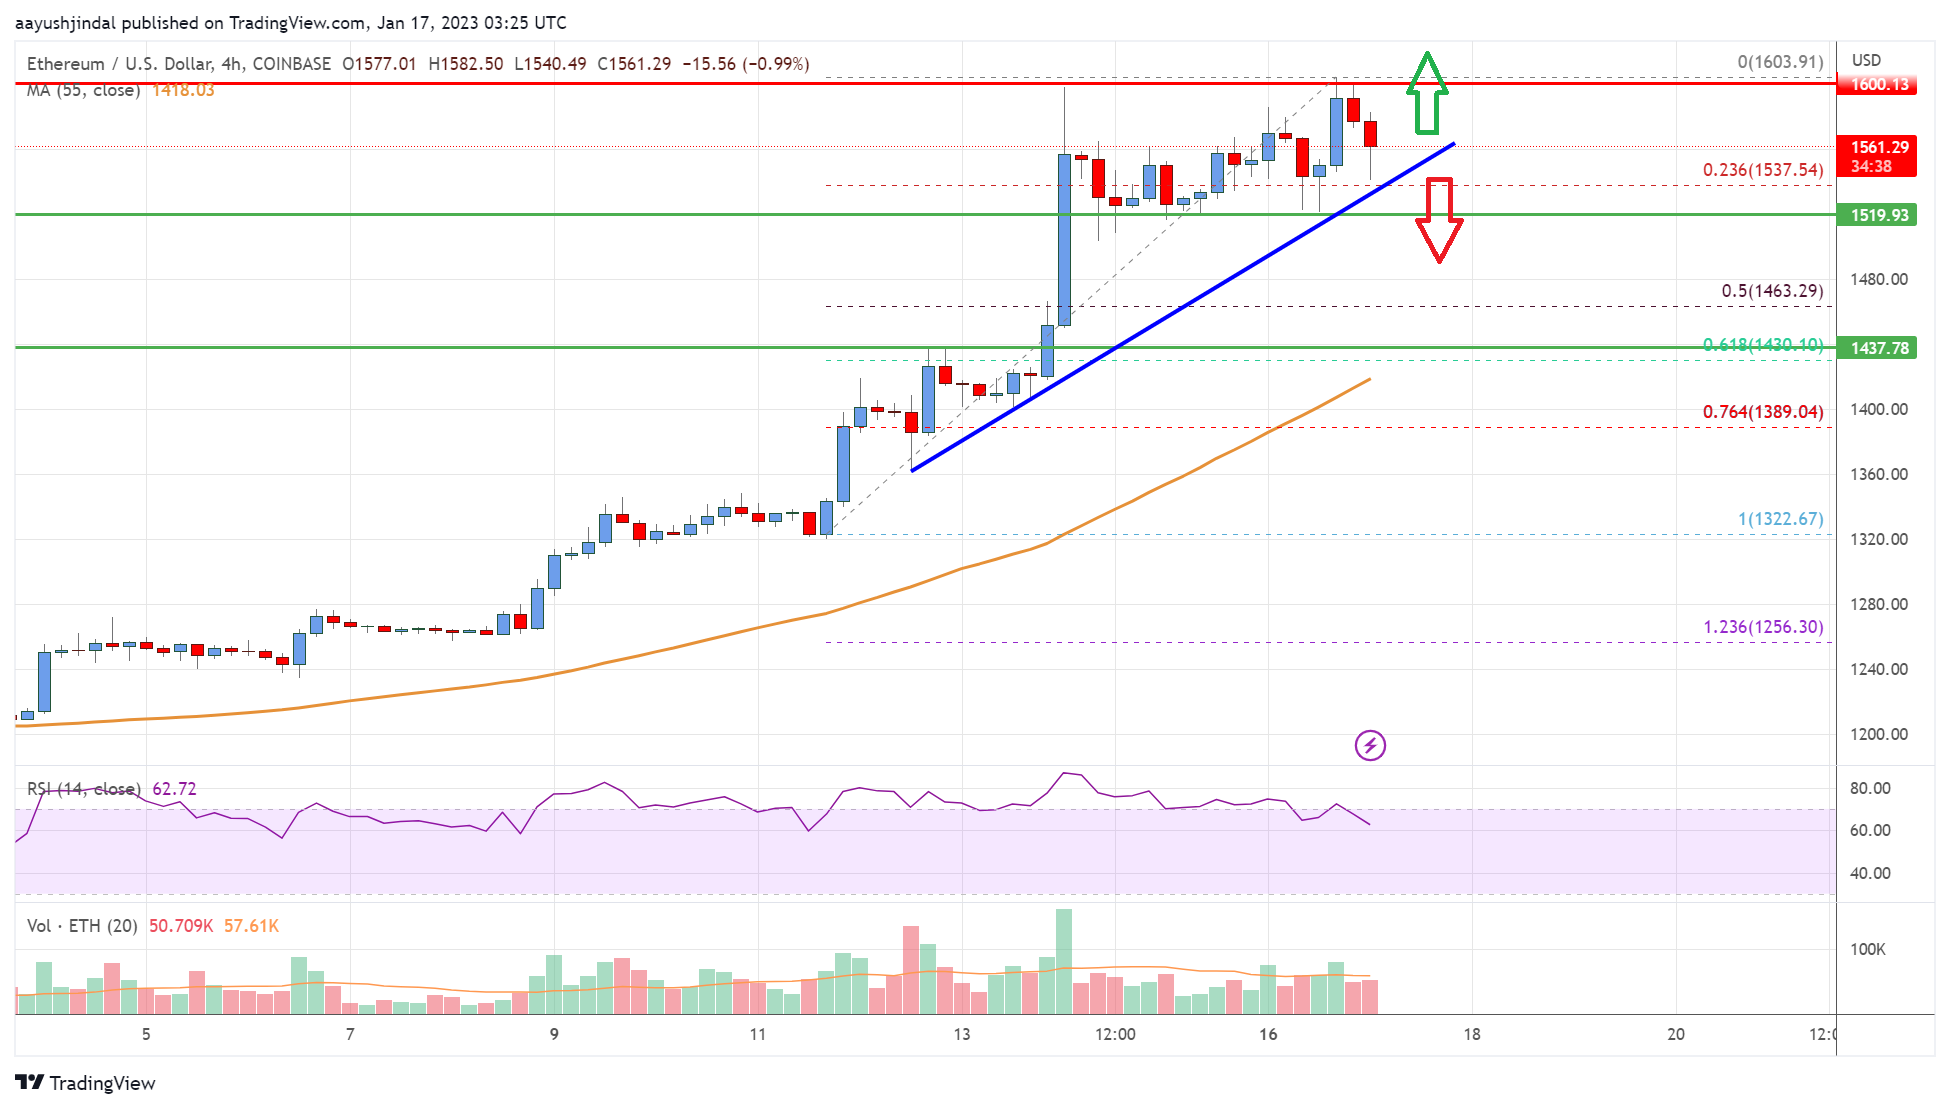 Ethereum Price Analysis: Rally Pauses But Not Likely Over